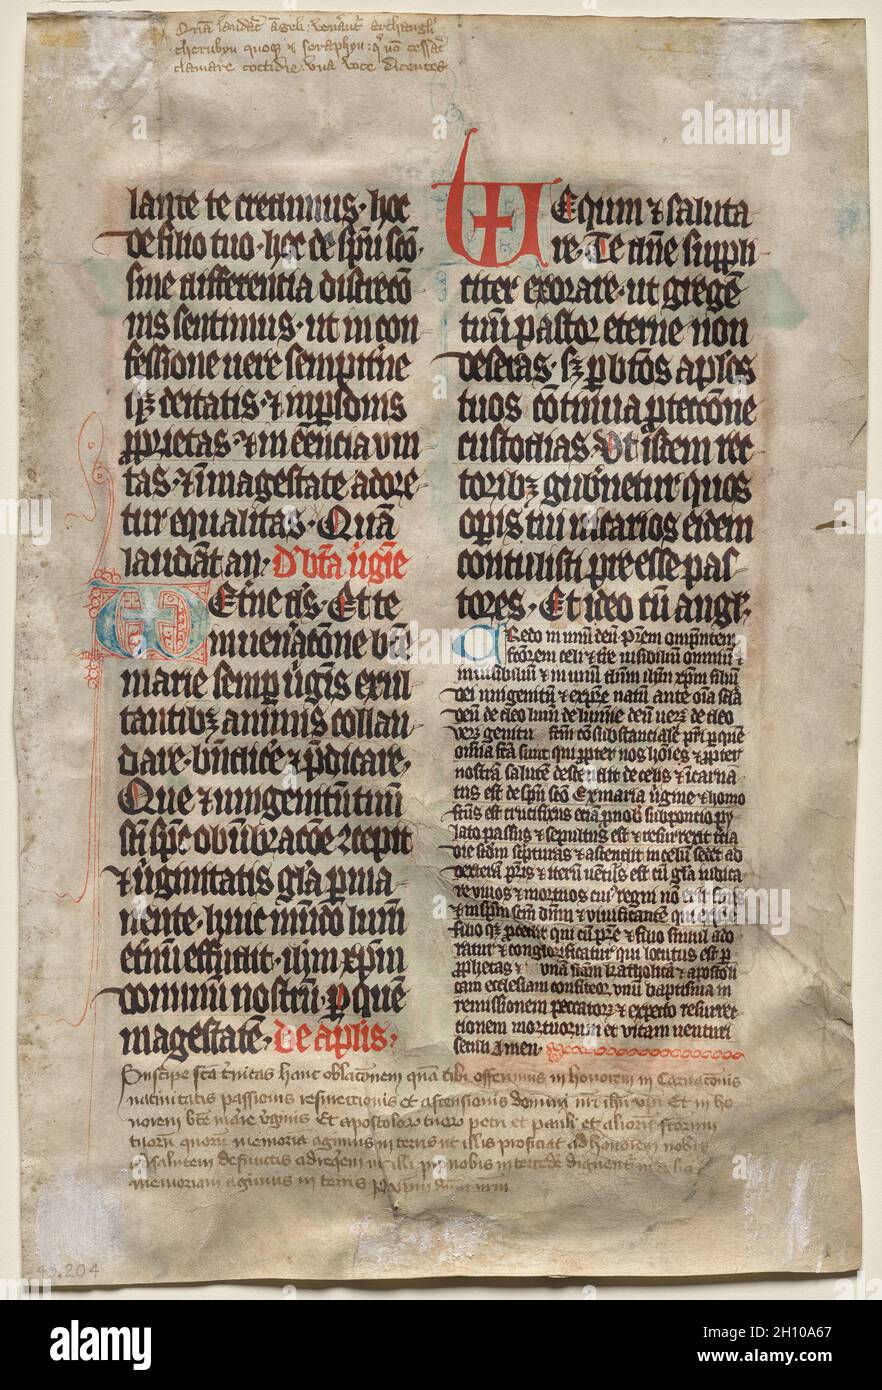 Leaf from a Missal: Text (verso), c. 1330-40. Bohemia. Ink, tempera, and gold leaf on parchment; sheet: 35.4 x 23.5 cm (13 15/16 x 9 1/4 in.).  The crucified Christ was a central theme of medieval visual art. Each period set its own artistic and iconographic priorities, depending on the function and context of the works. For example, the dead Christ with his head bowed, the side wound dripping with blood, and the richly designed loincloth is characteristic of the 1300s. This miniature is localized to Bohemia (present-day Czech Republic and Slovakia), with its capital Prague as a leading art ce Stock Photo